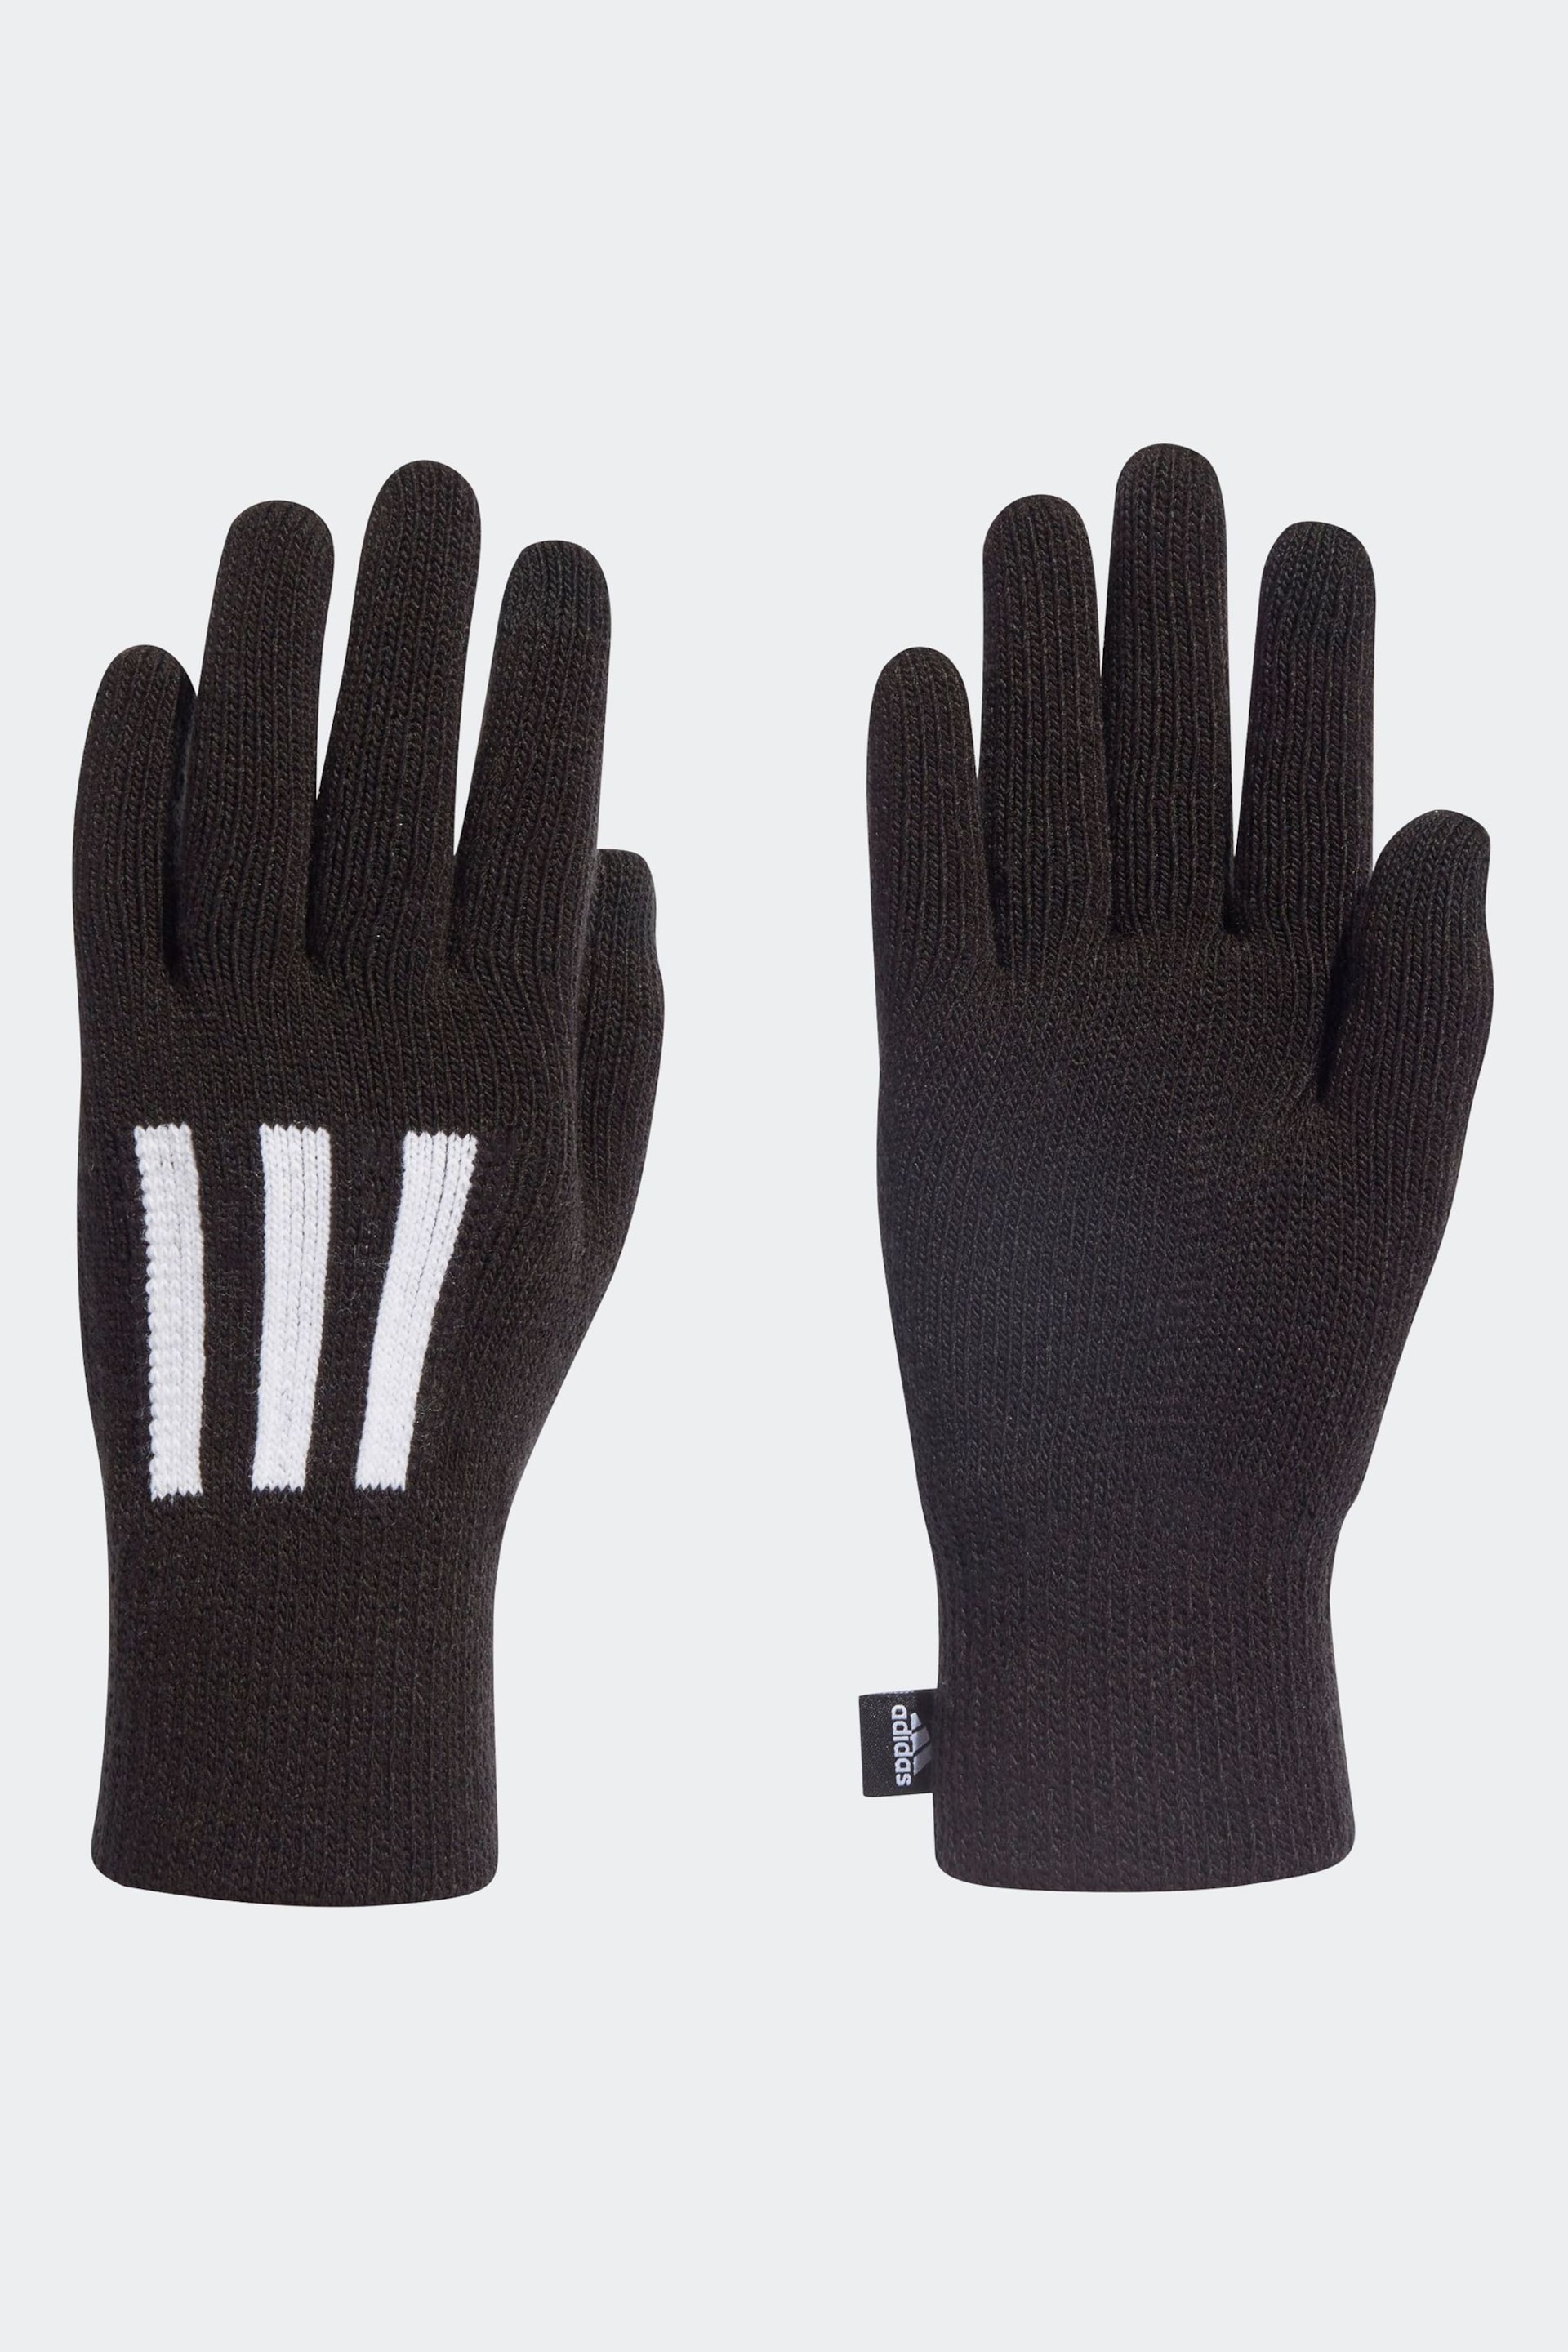 adidas Black Adult 3-Stripes Conductive Gloves - Image 1 of 3